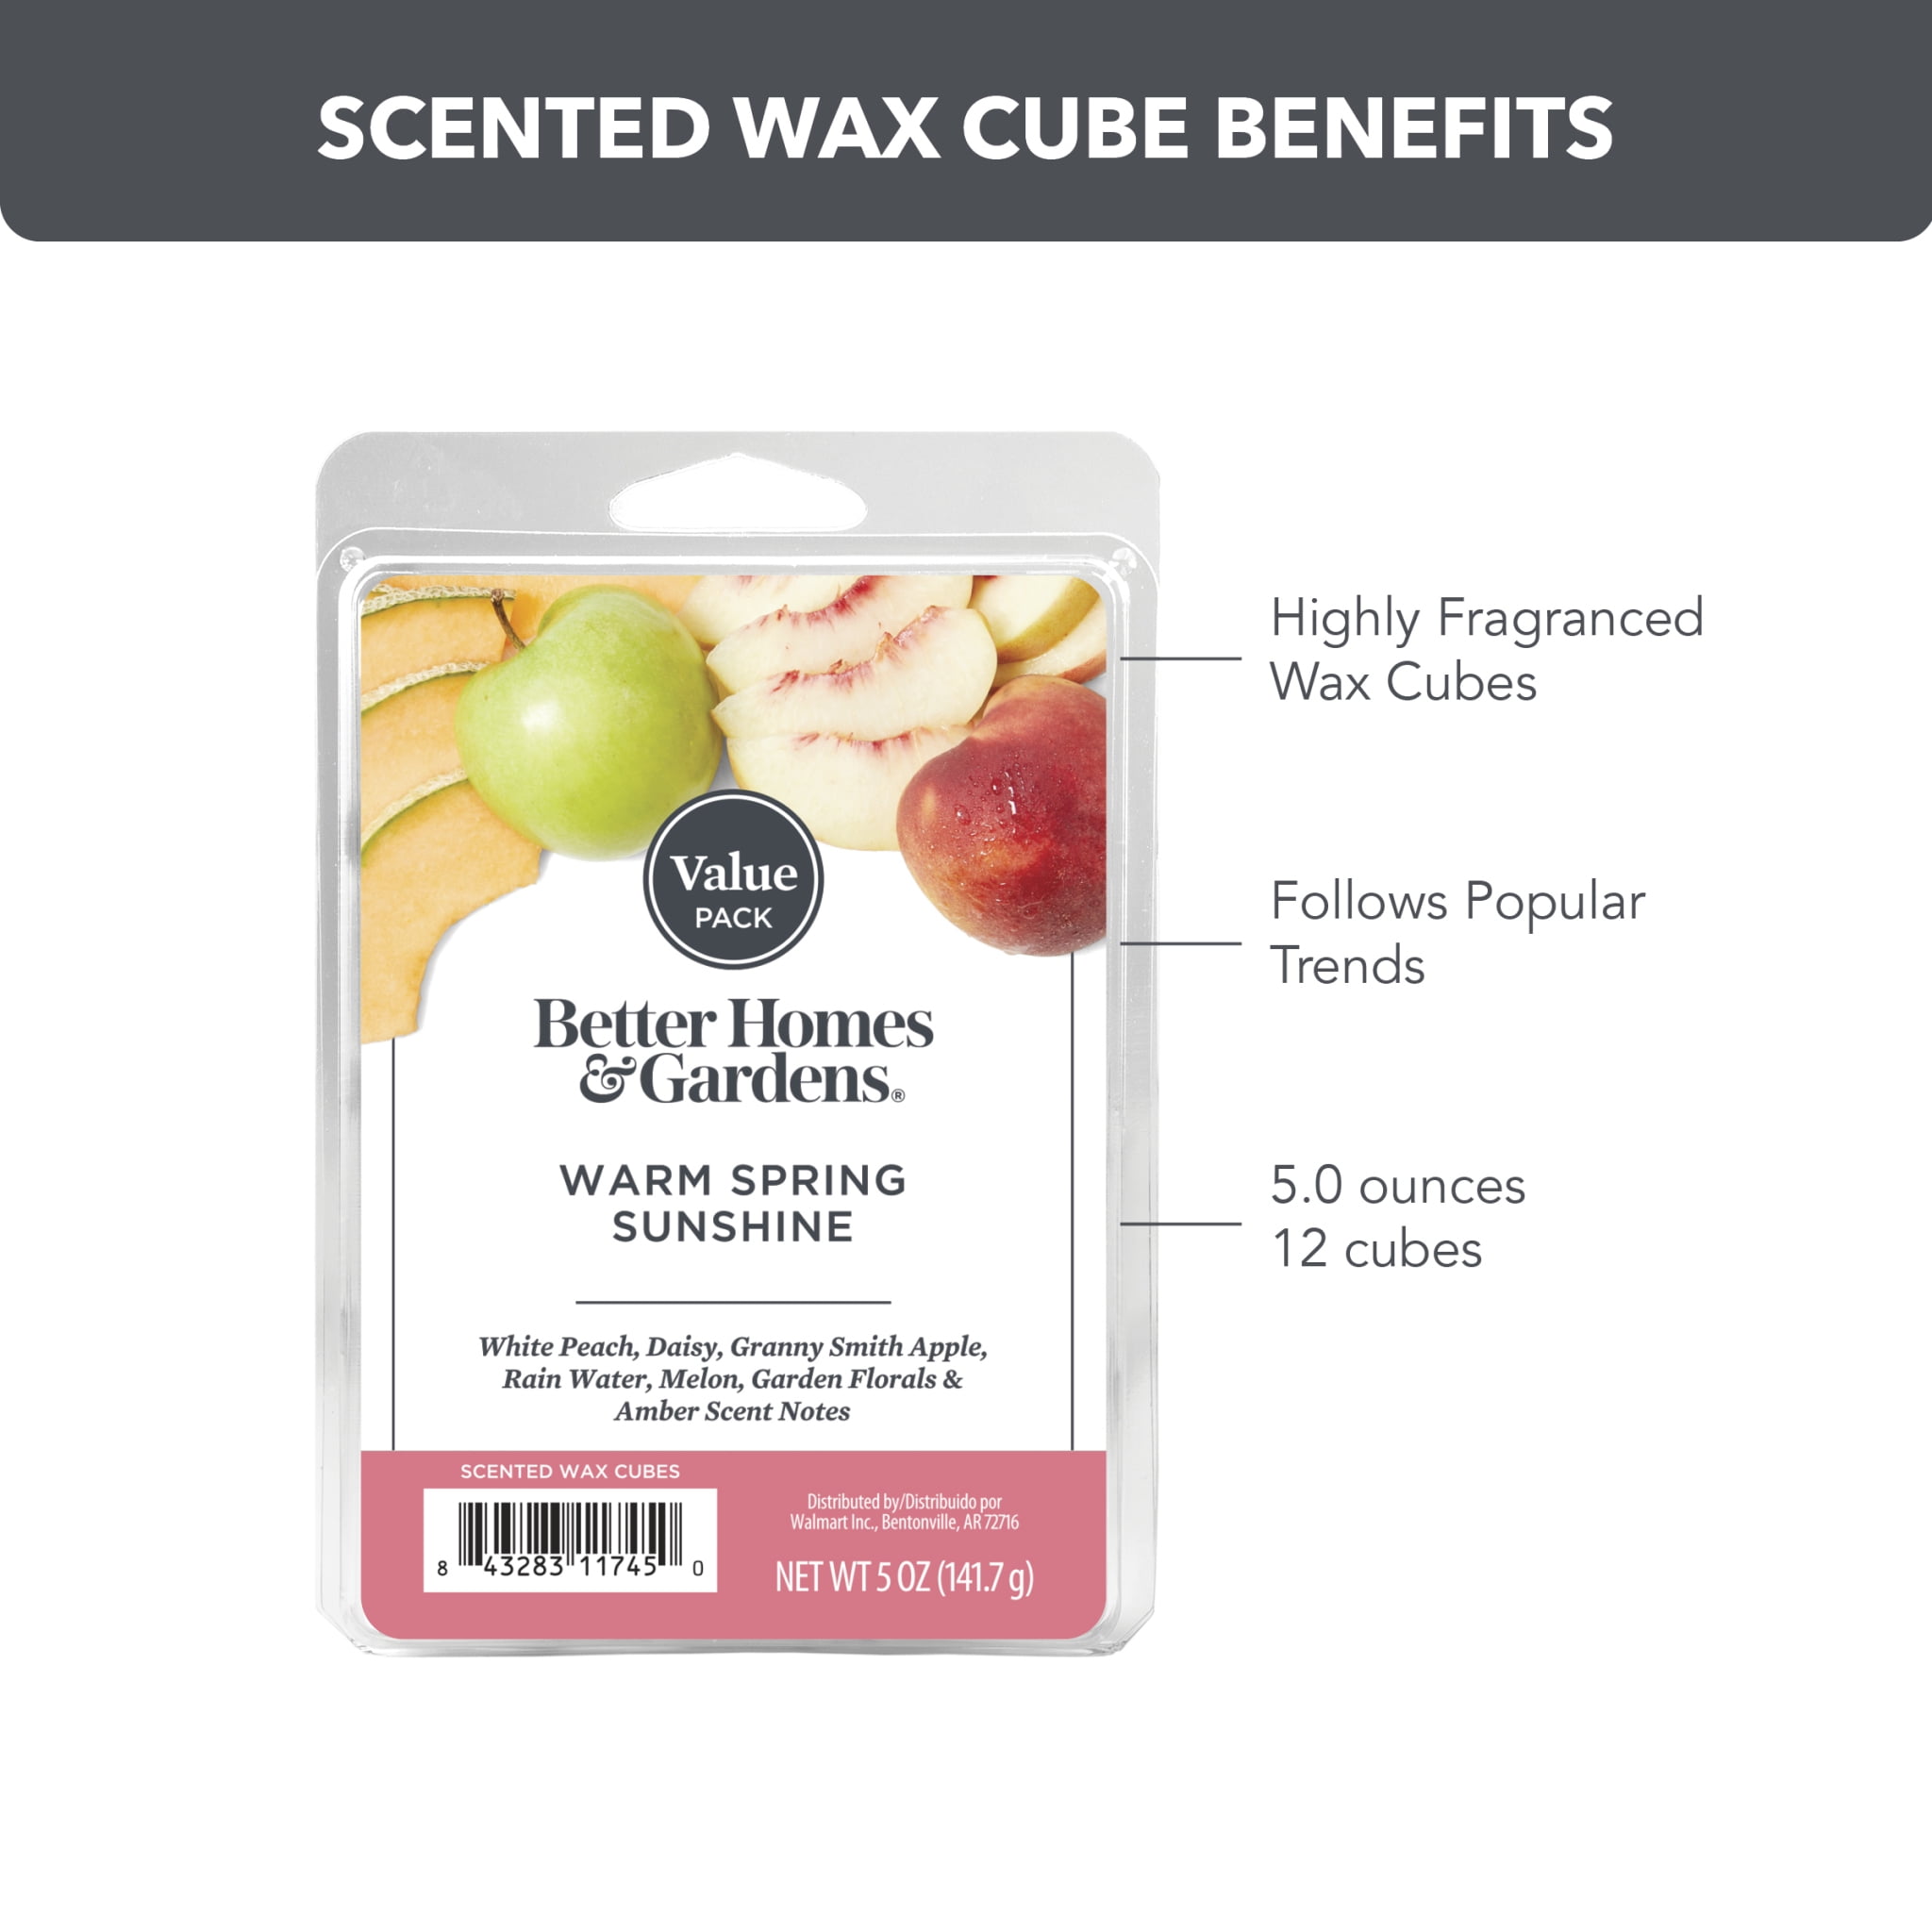 Warm Spring Sunshine Scented Wax Melts, Better Homes & Gardens, 2.5 oz  (1-Pack) 